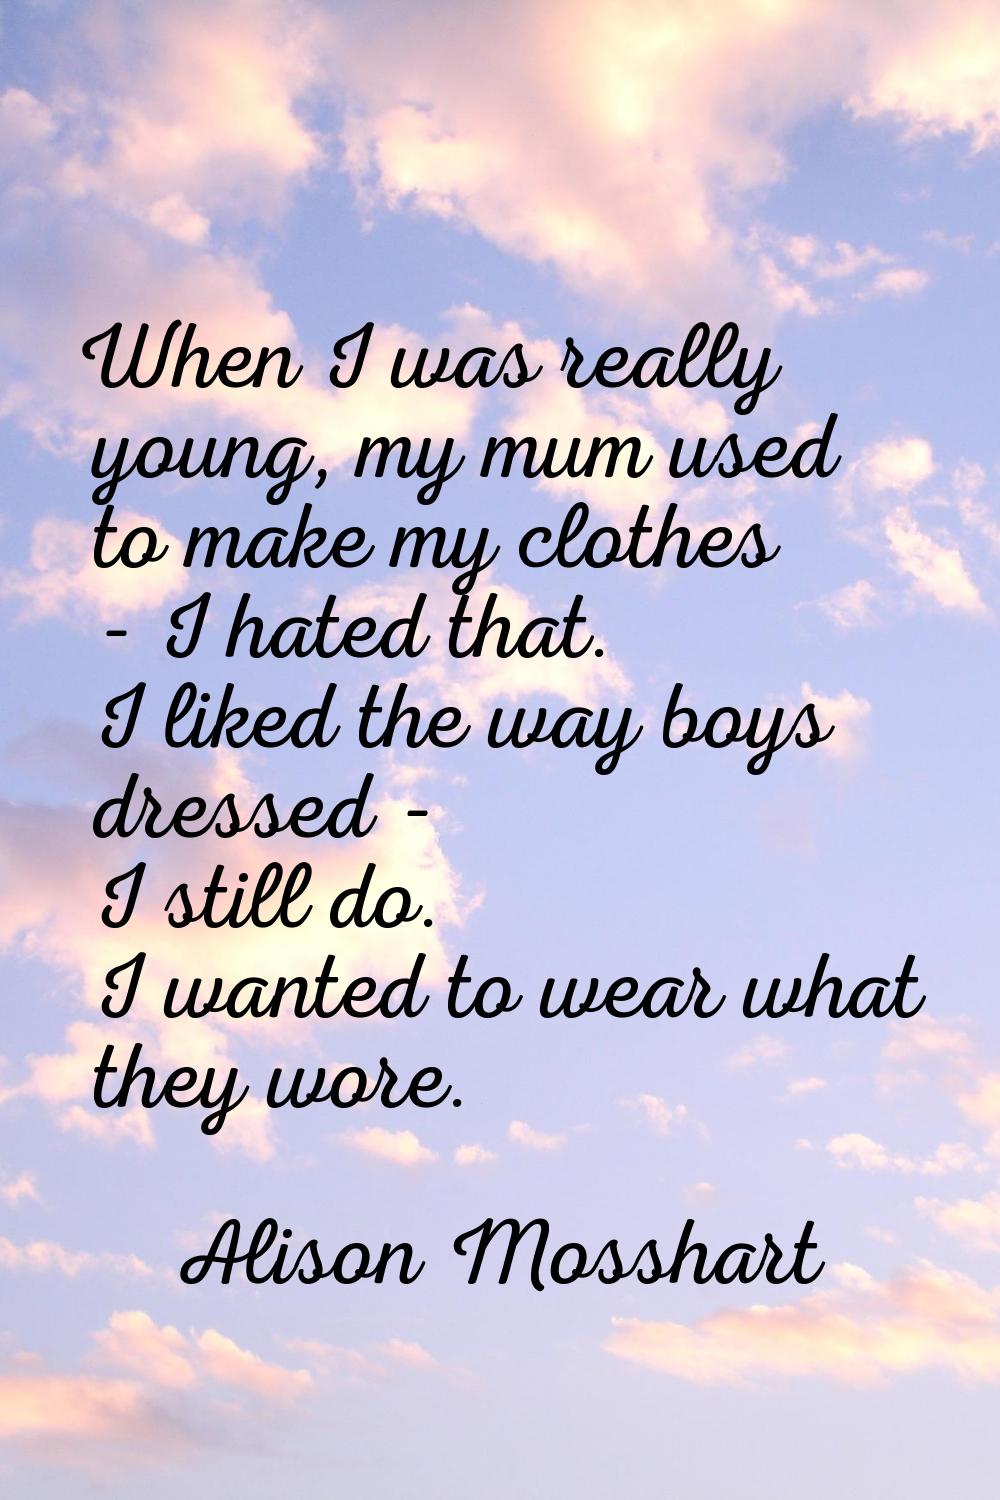 When I was really young, my mum used to make my clothes - I hated that. I liked the way boys dresse